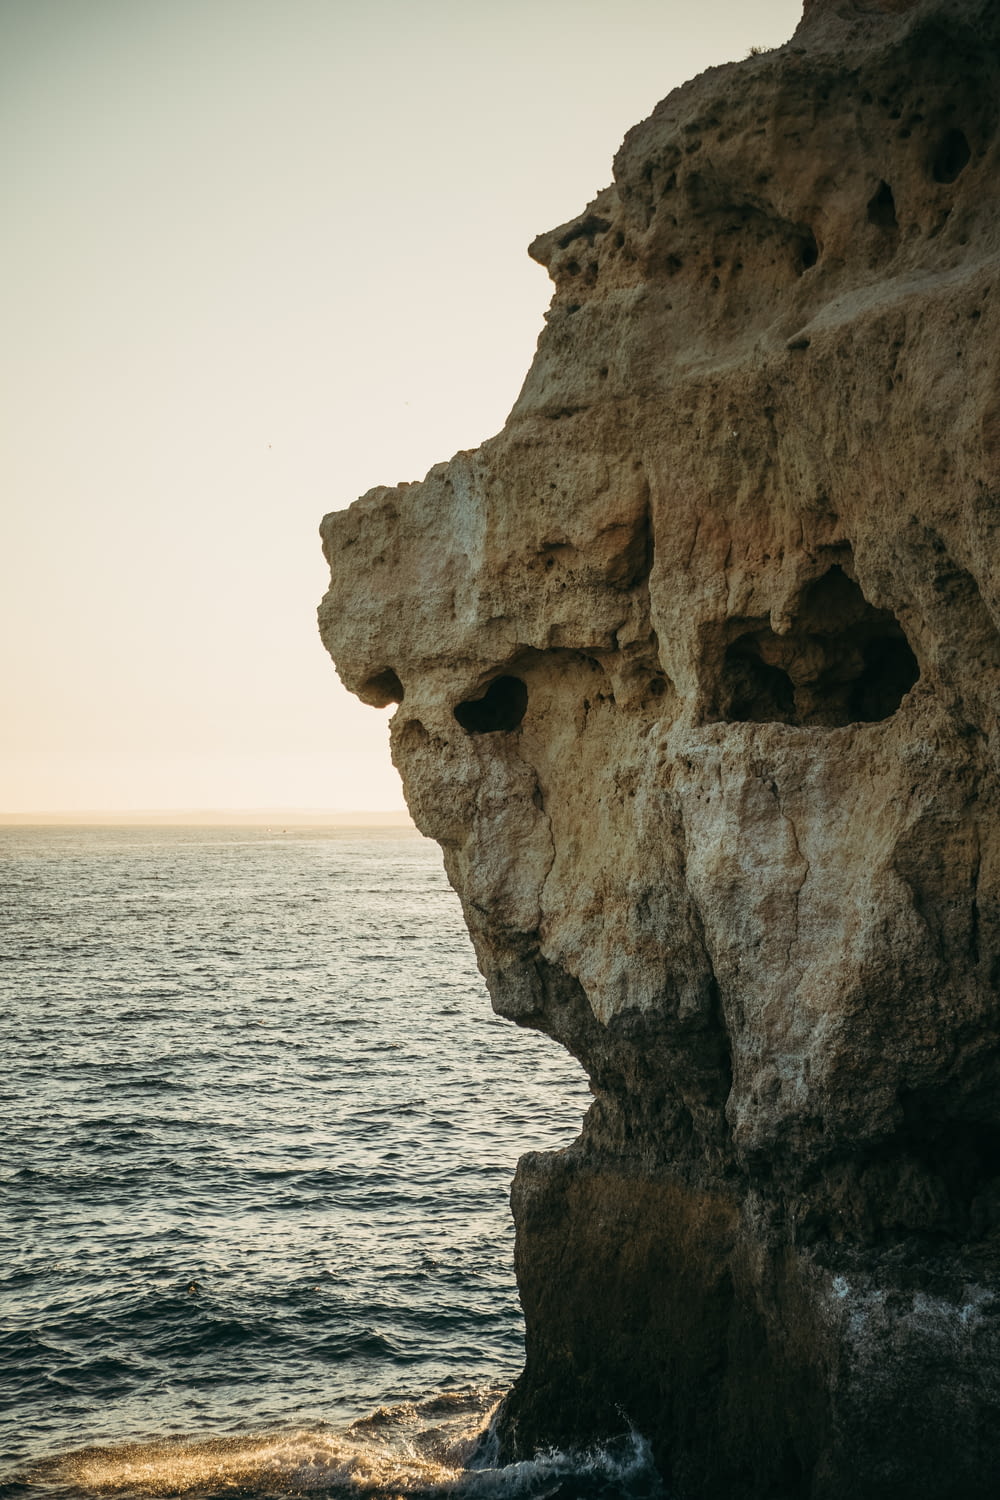 a rock formation on the edge of the ocean